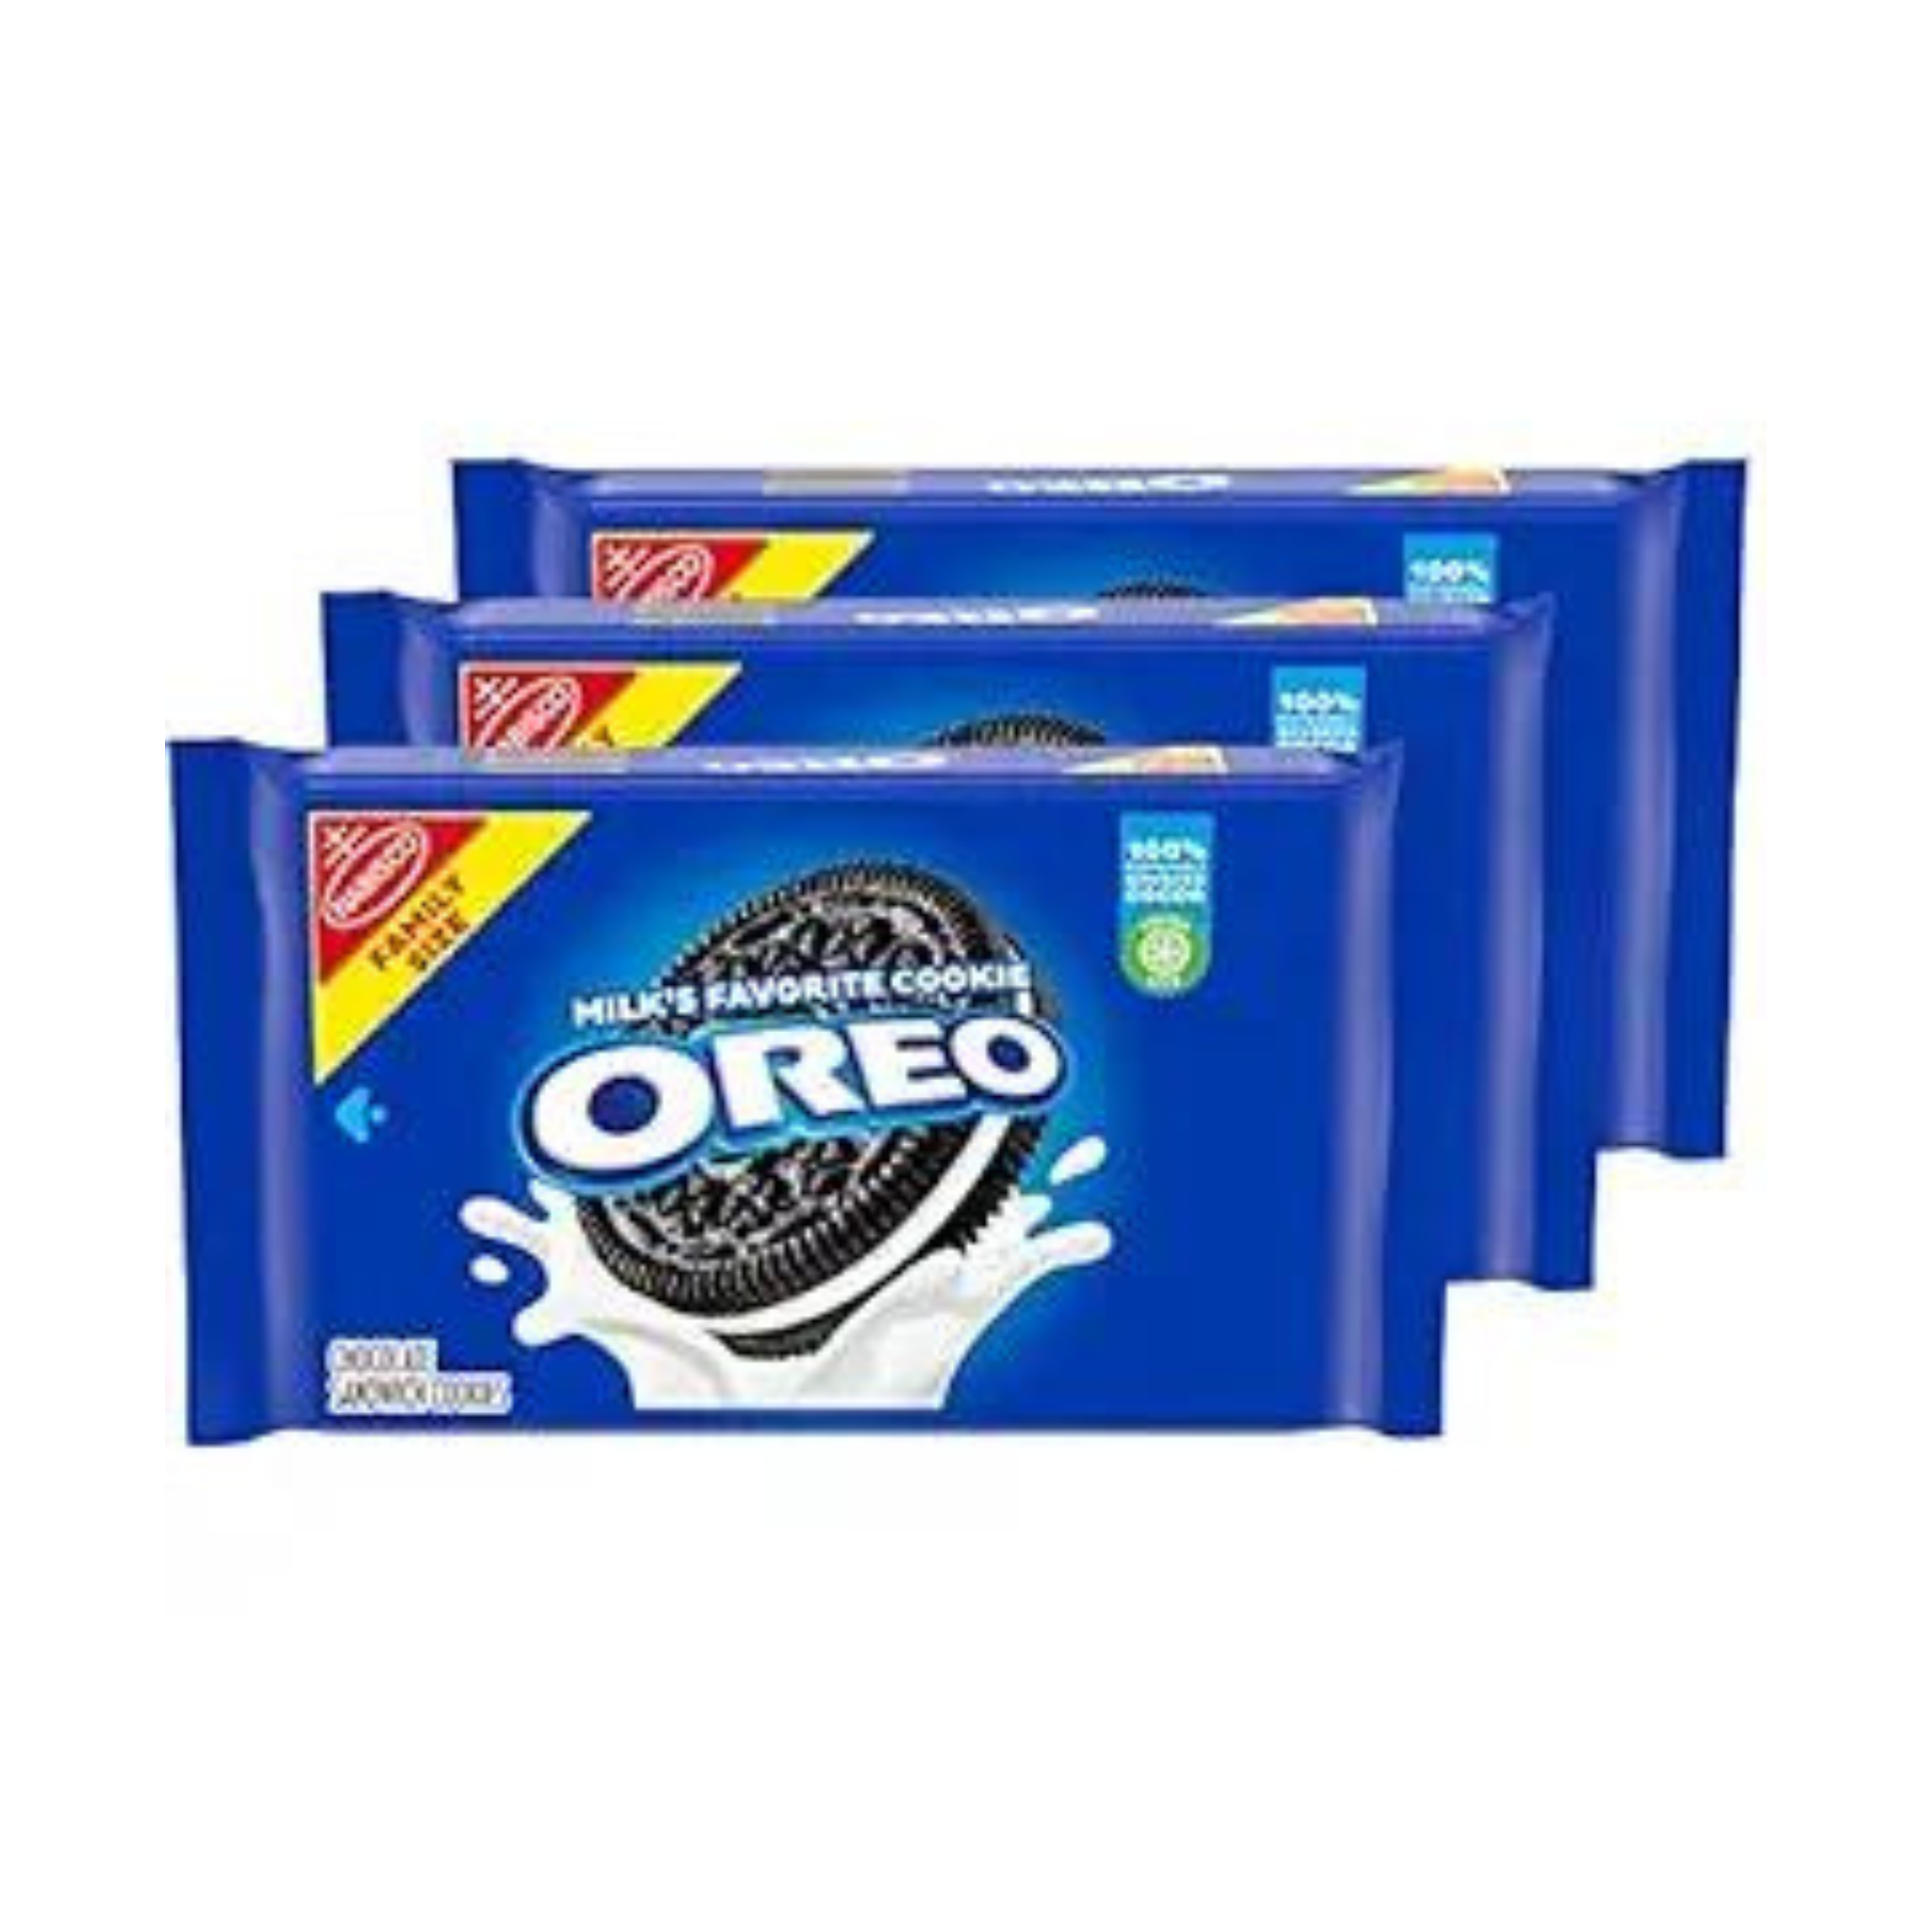 3-Pack 19.1-Oz Oreo Chocolate Sandwich Cookies (Family Size)